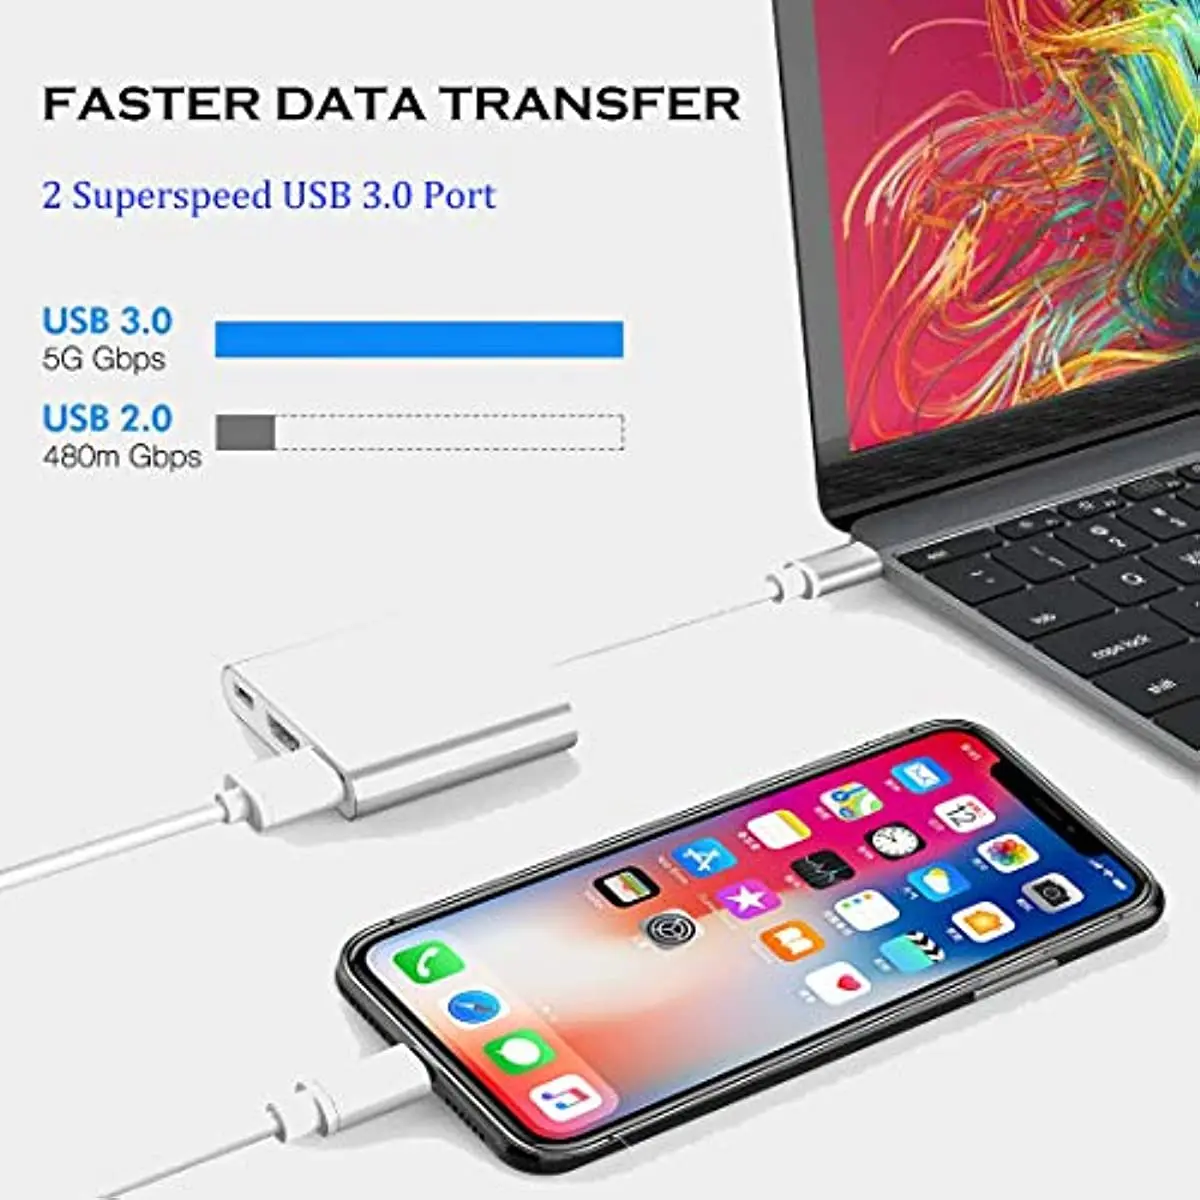 Nku USB C Thunderbolt 3 USB 3.1 Type-C To HDMI-Compatible+USB 3.0+PD Charging Port 3 In 1 Hub for Laptop Macbook Air Ipad Pro images - 6